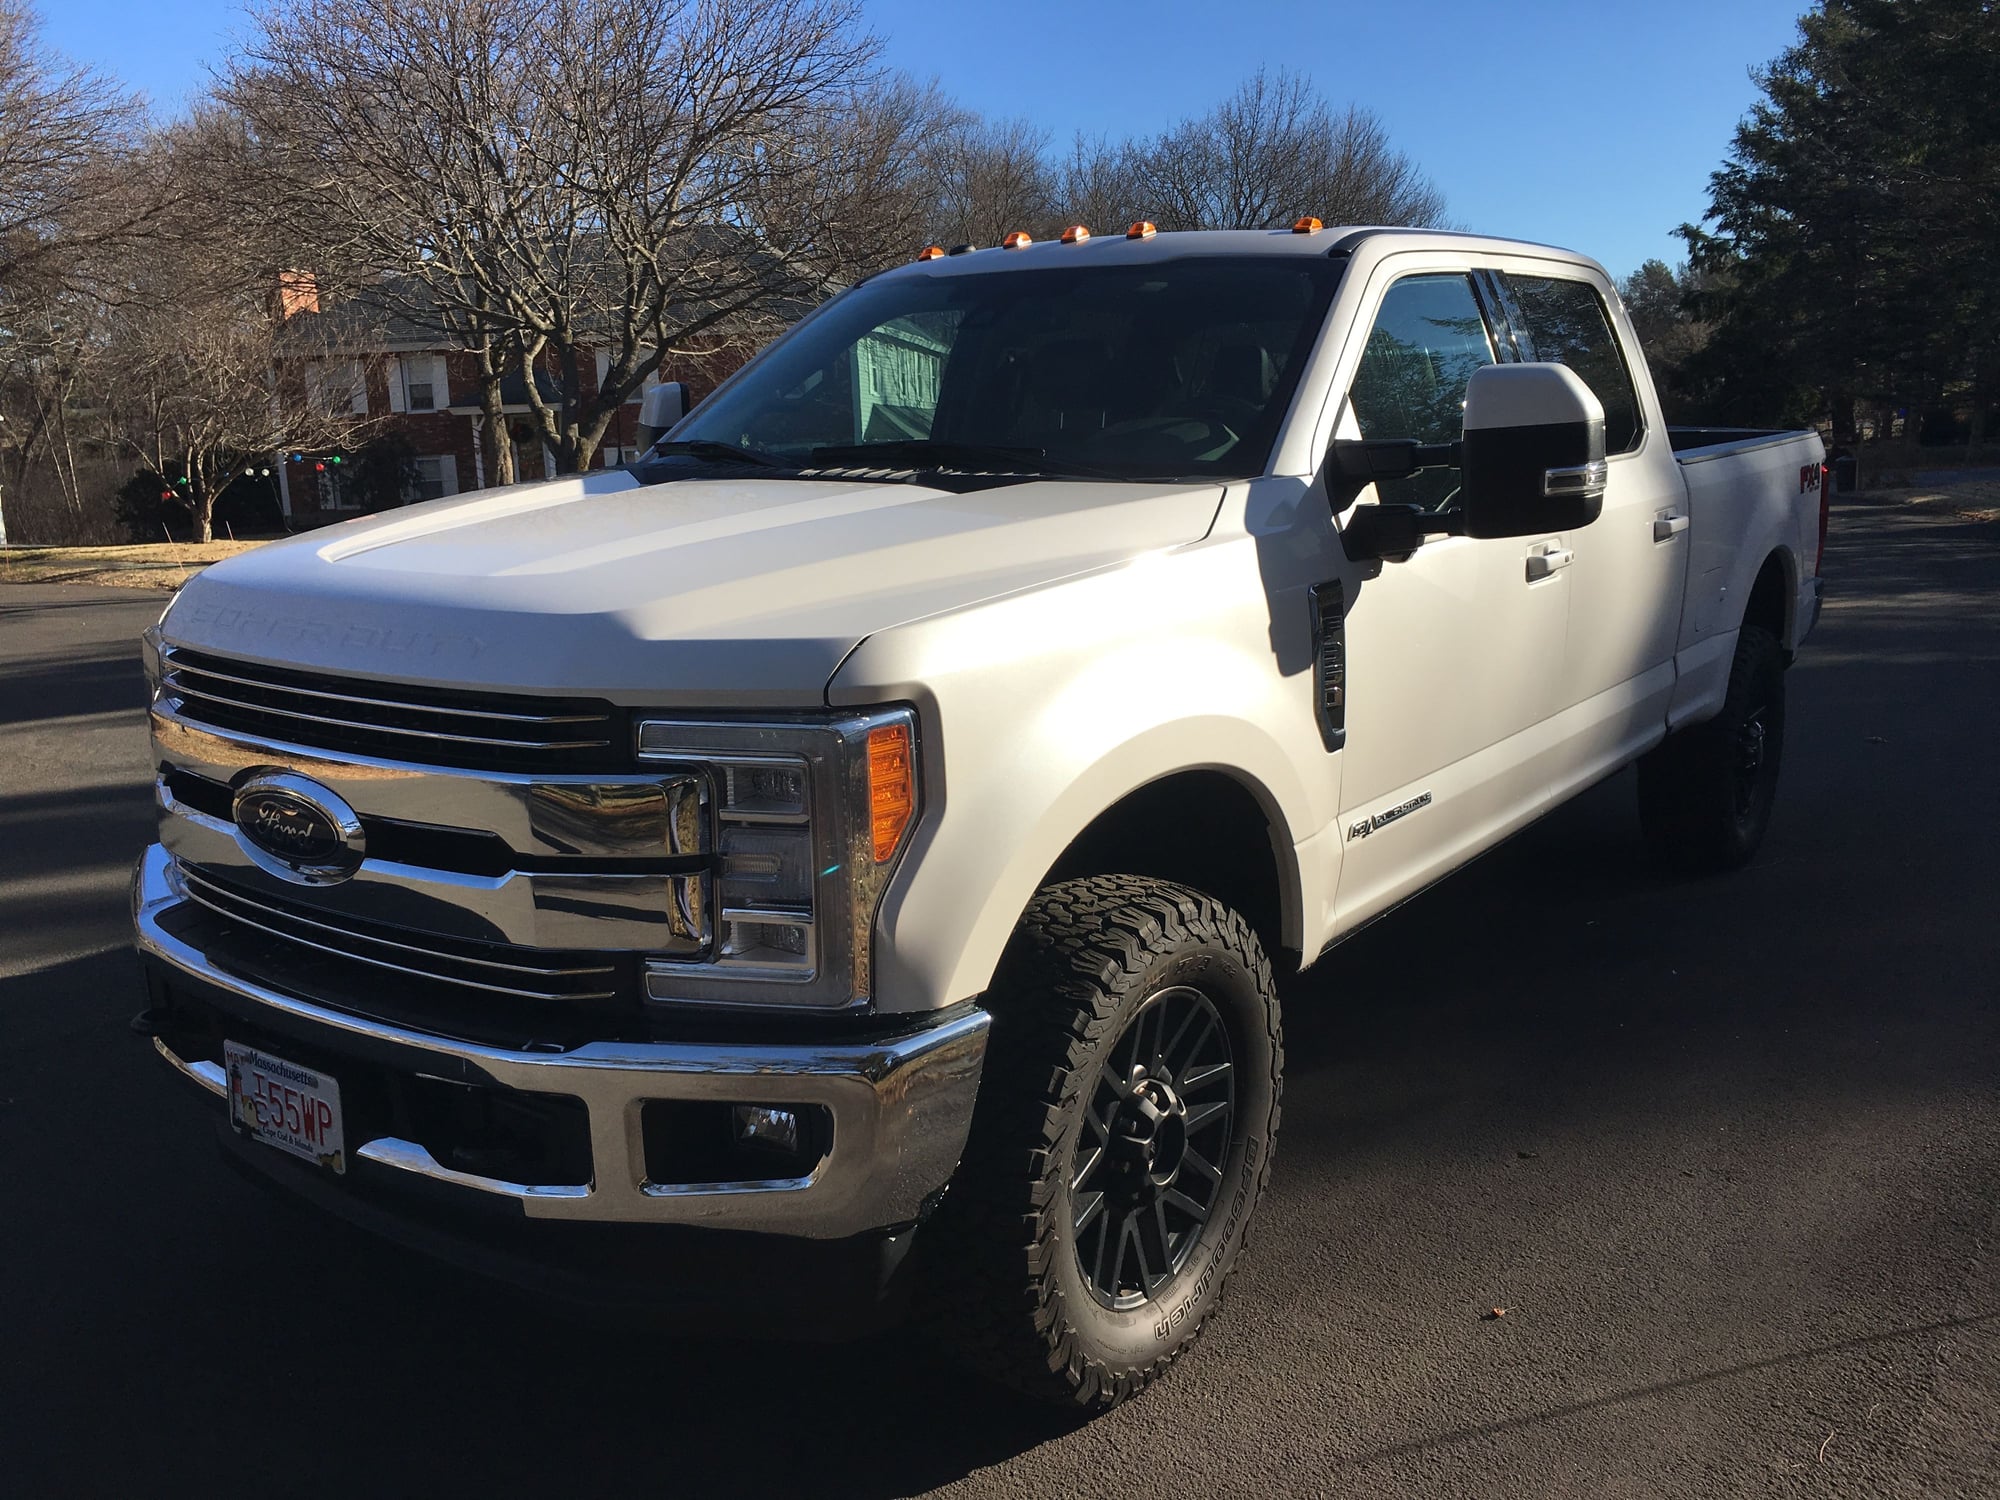 Like new 2017 Ford F-350 Diesel for sale - The Hull Truth - Boating and